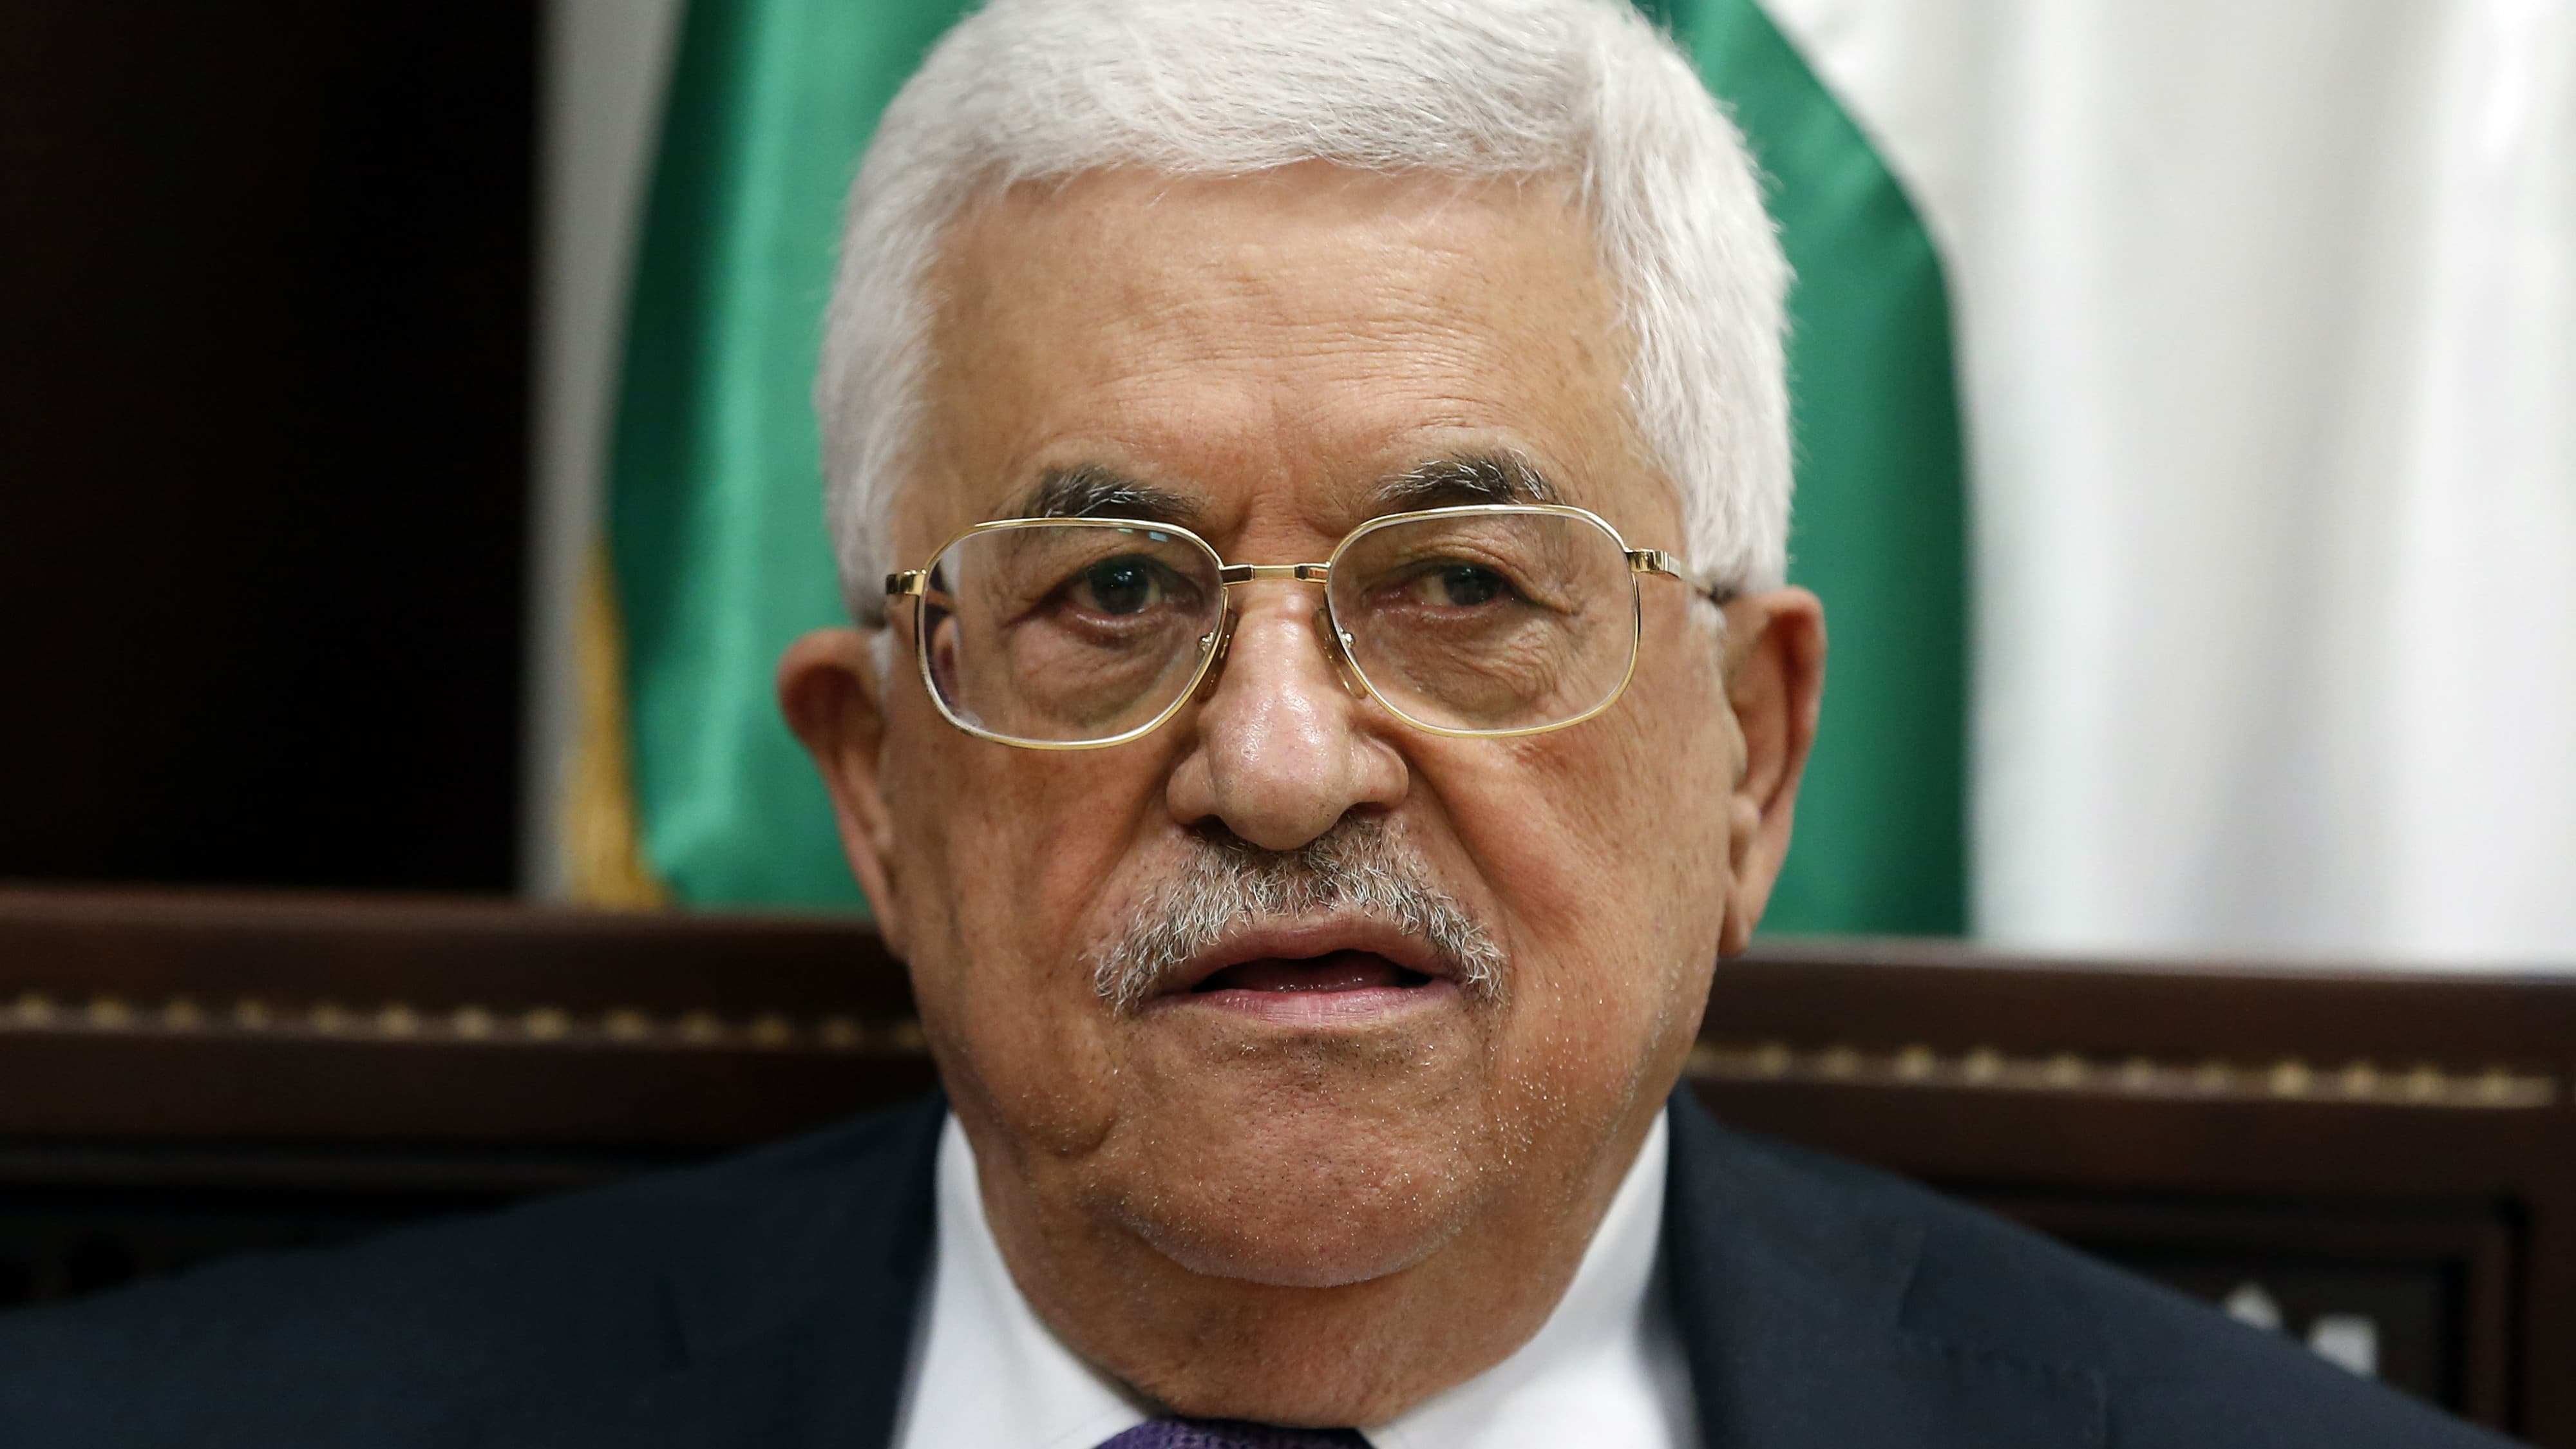 Mahmoud Abbas: Hamas’ actions do not represent the Palestinian people